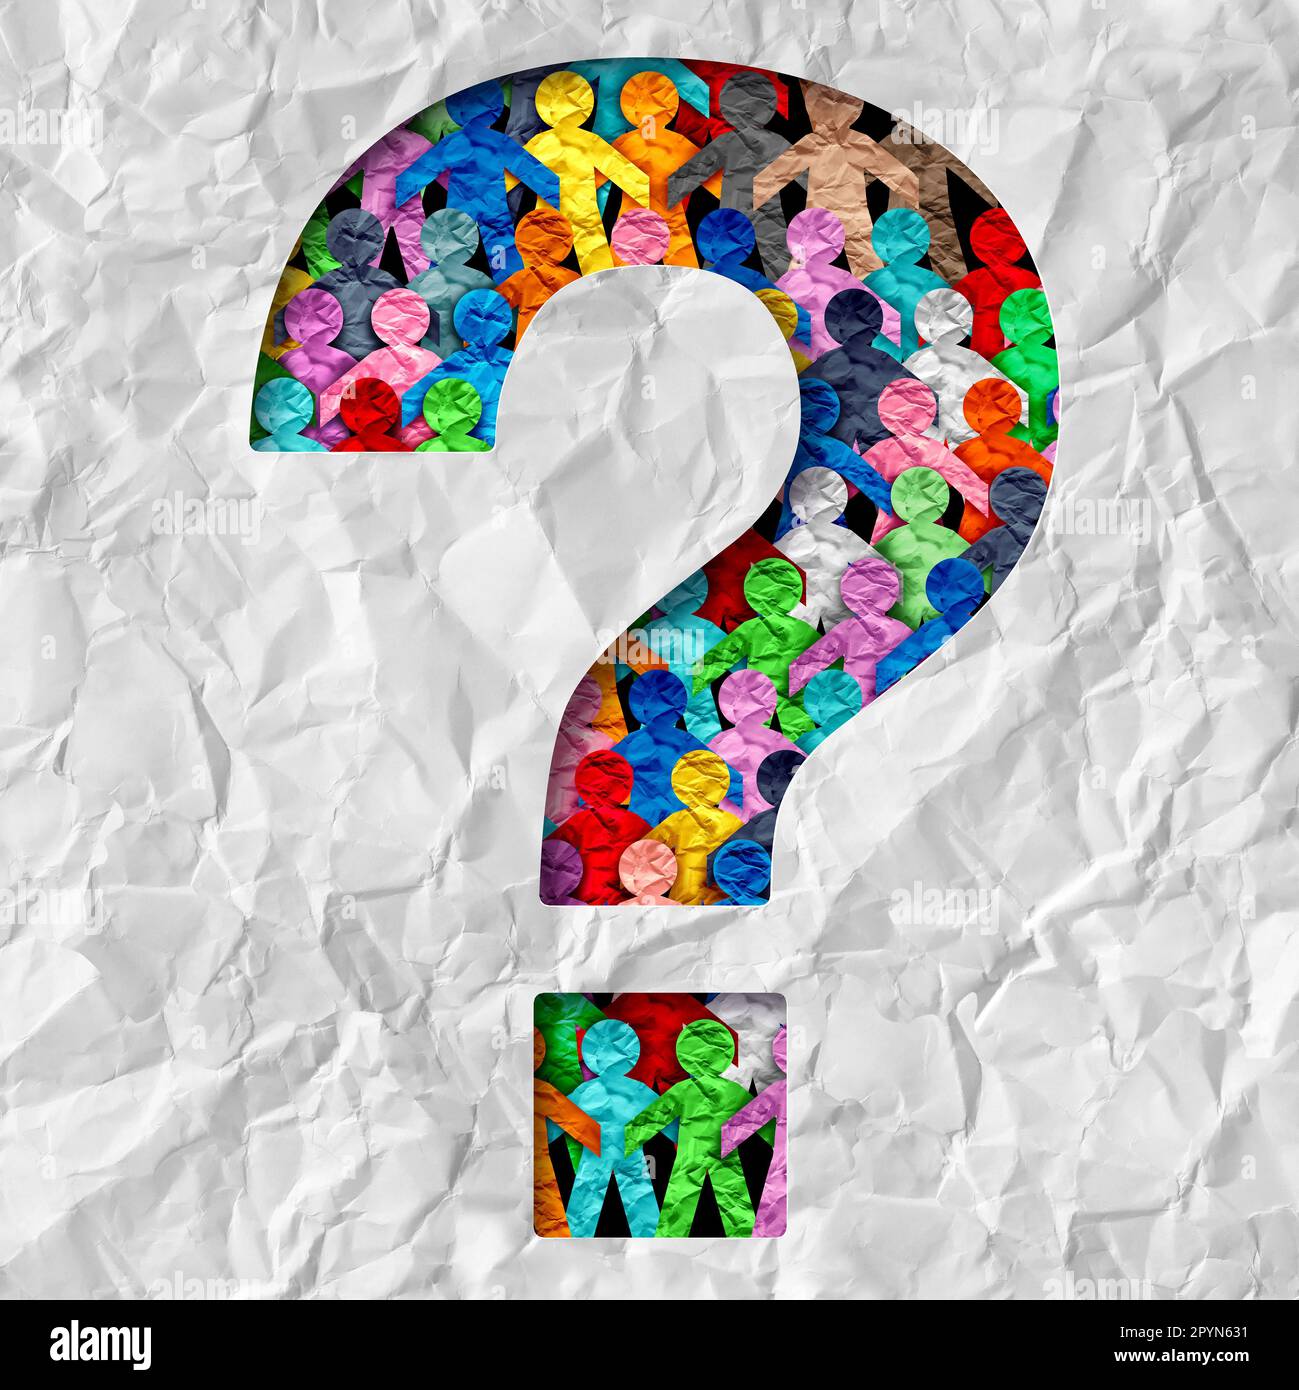 Public Information and Employee Diversity questions and worker inclusion info in the workplace as diverse people working together in society Stock Photo